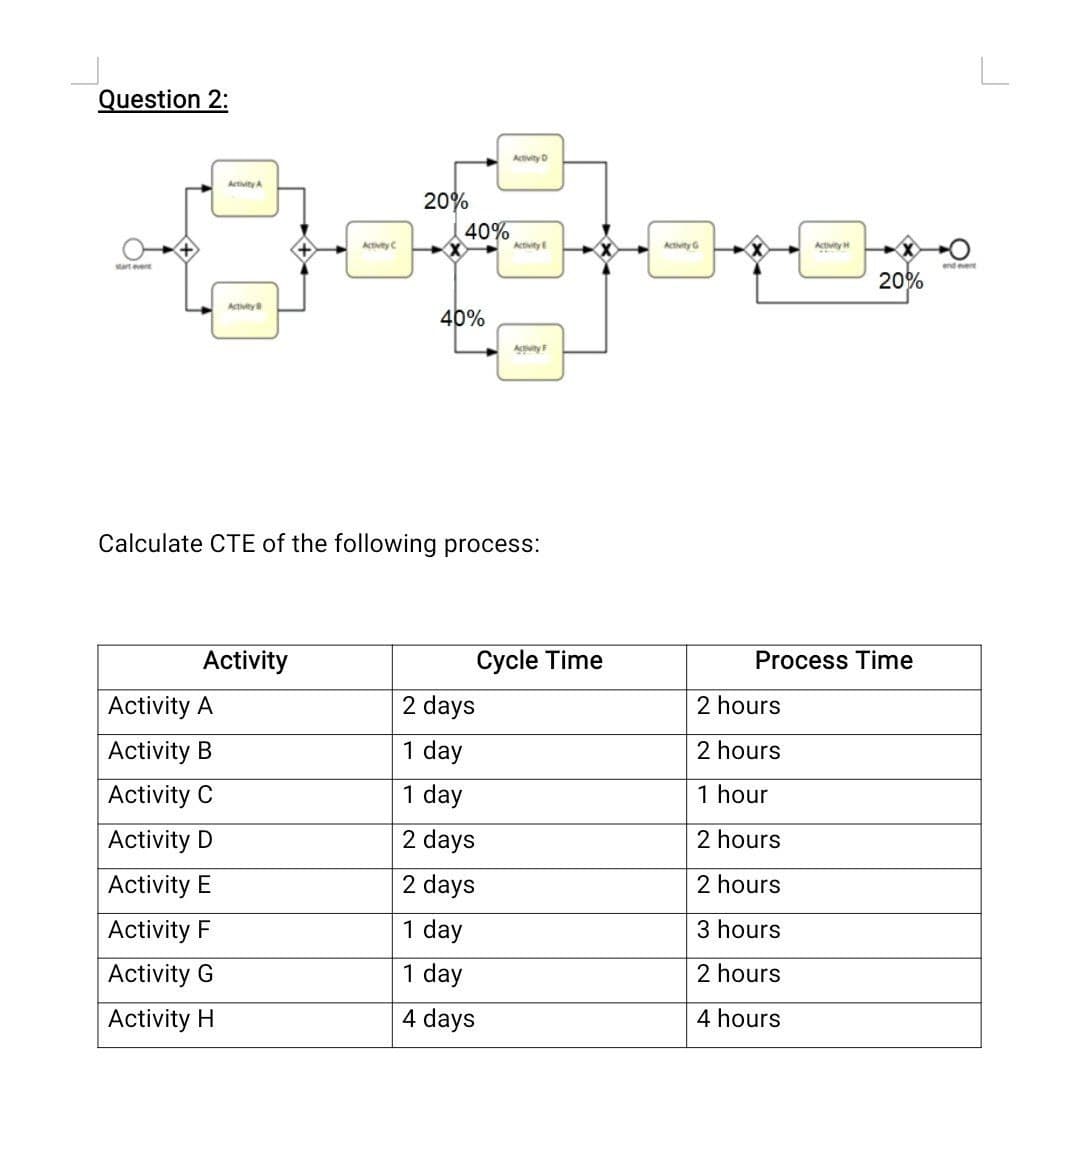 Question 2:
start ever
Activity A
Activity B
Activity A
Activity B
Activity C
Activity D
Activity E
Activity F
Activity G
Activity H
Activity
Activity C
20%
40%
40%
Calculate CTE of the following process:
Activity D
Activity E
2 days
1 day
1 day
2 days
2 days
1 day
1 day
4 days
Cycle Time
Activity G
Activity H
2 hours
2 hours
1 hour
2 hours
2 hours
3 hours
2 hours
4 hours
20%
Process Time
end event
L